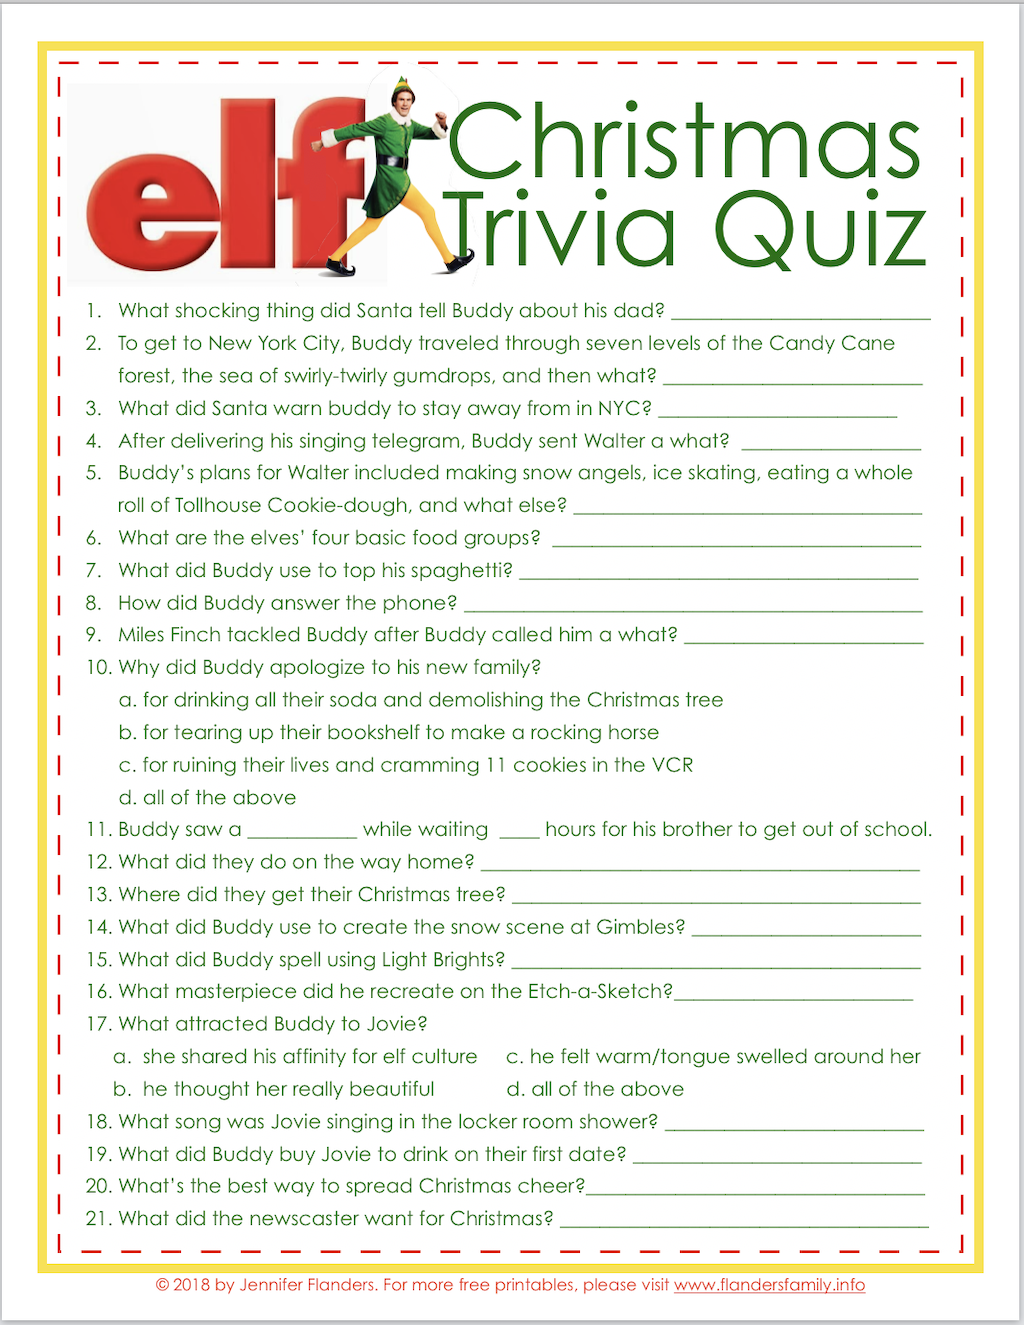 christmas-trivia-questions-and-answers-printables-get-your-hands-on